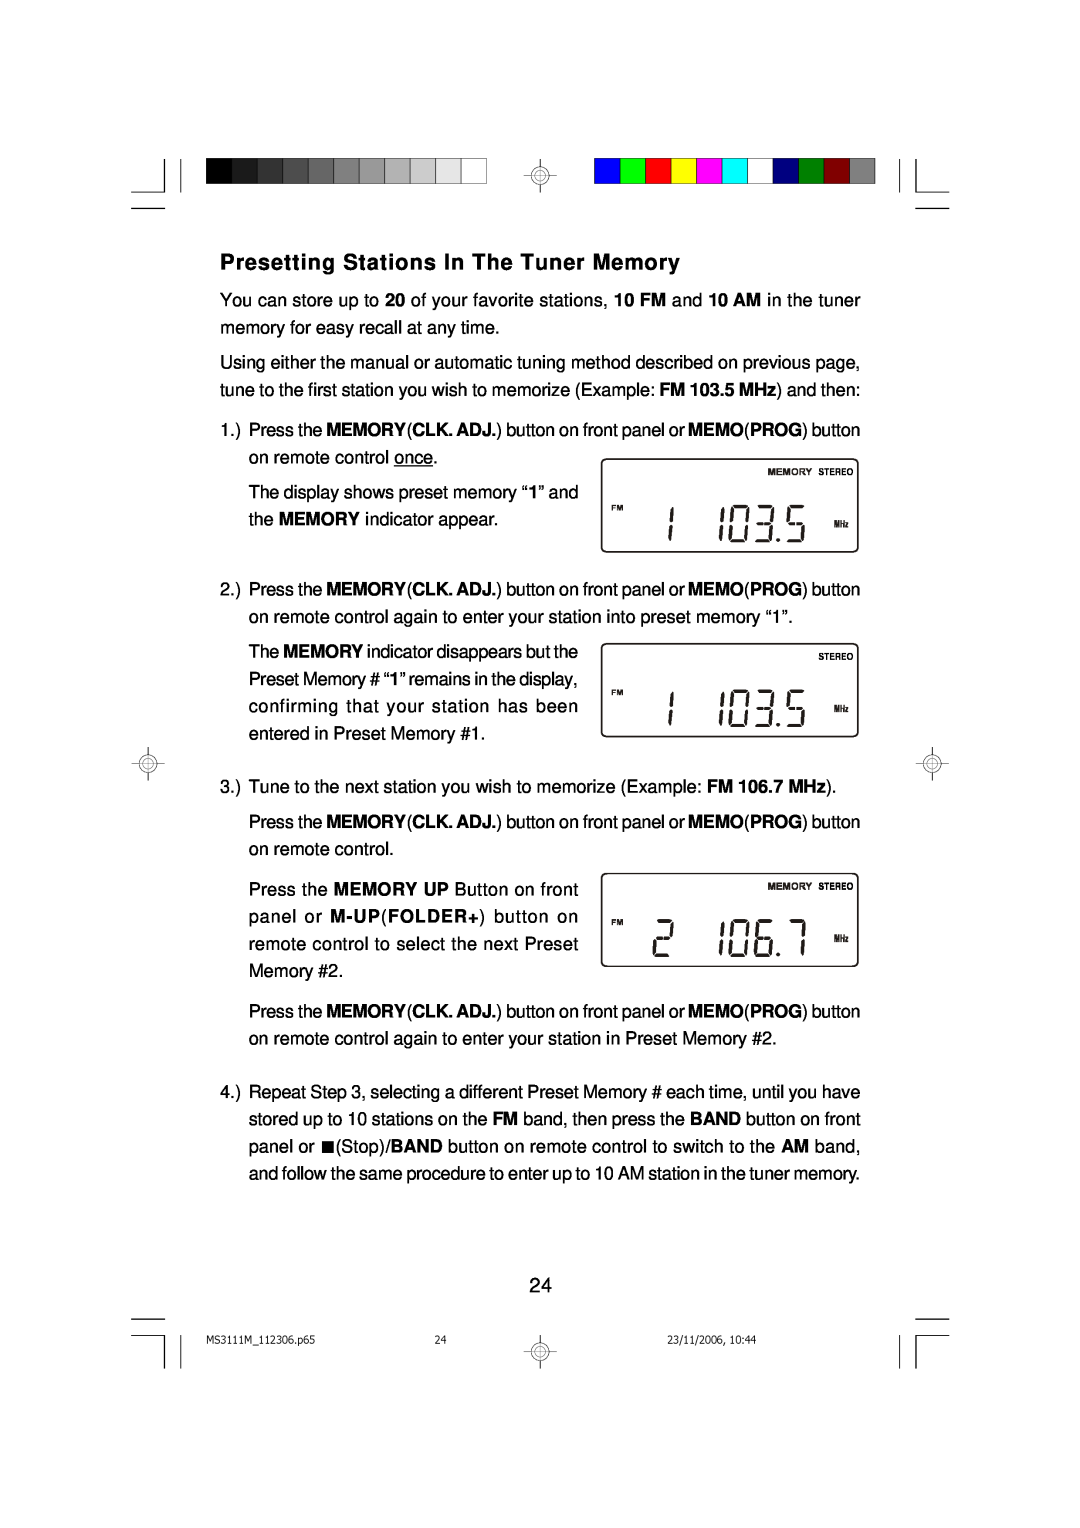 Emerson owner manual Presetting Stations In The Tuner Memory, MS3111M 112306.p65, 23/11/2006 